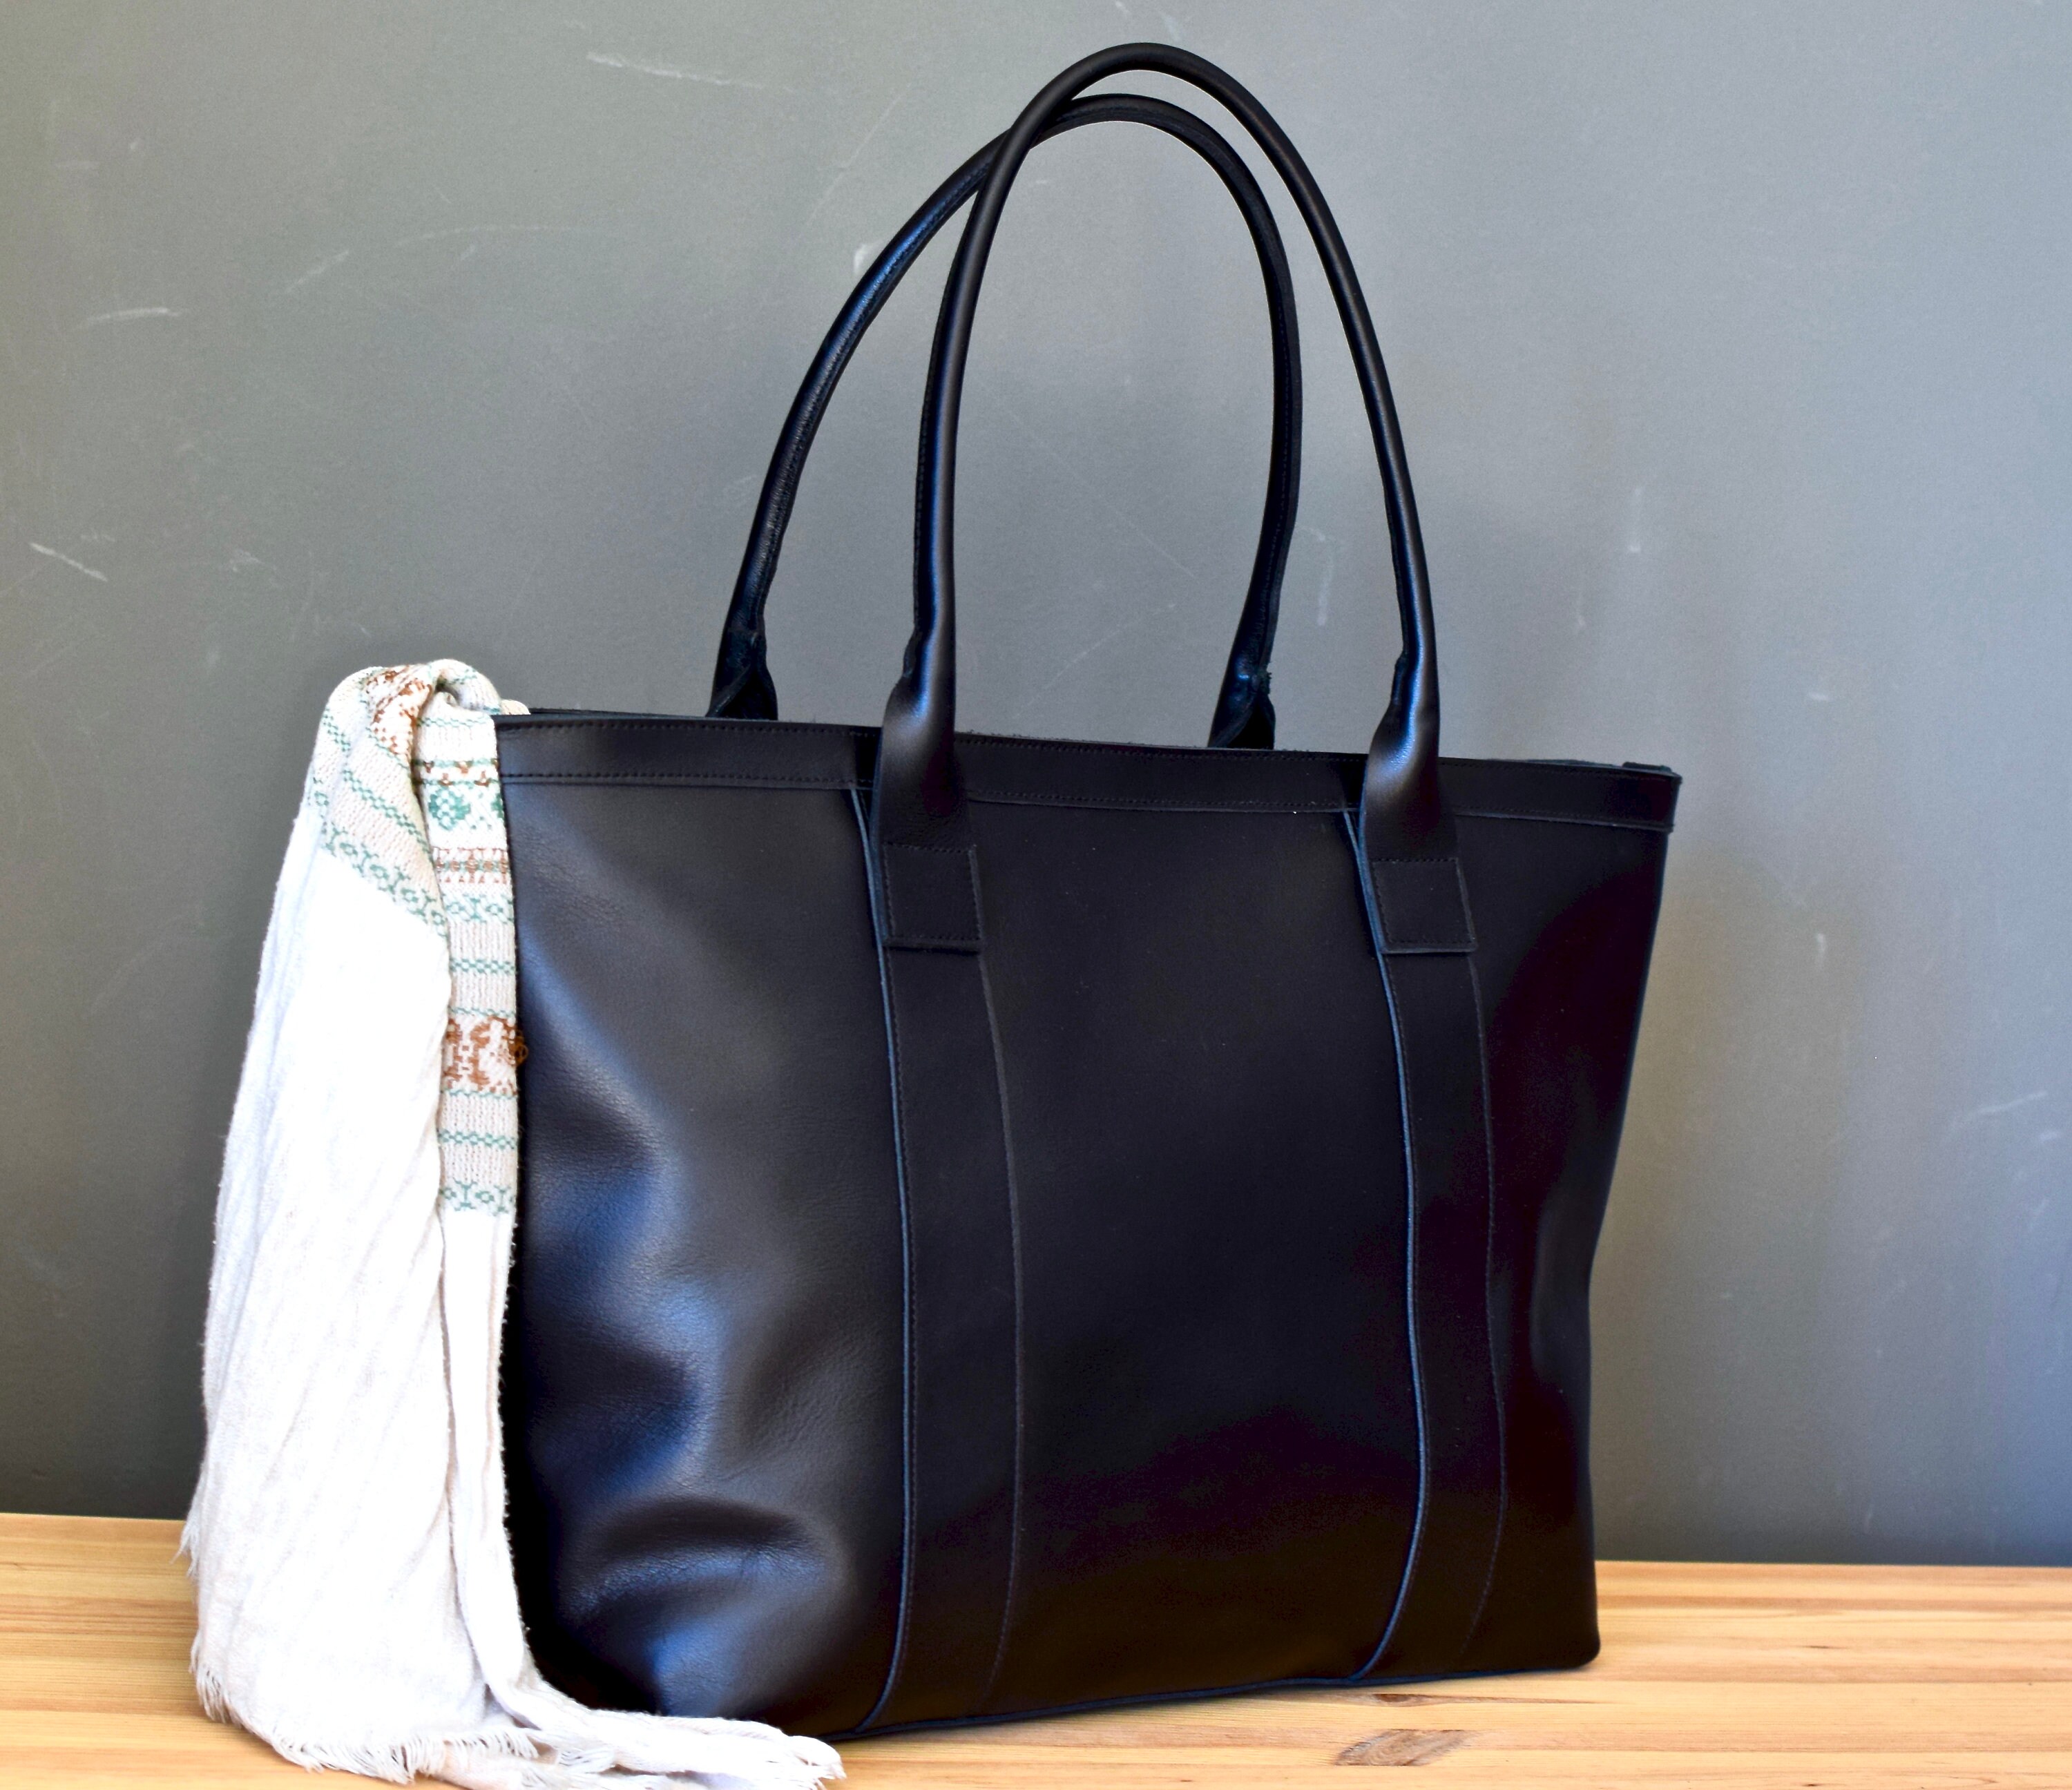 Oversized Leather bag. Weekender tote in black leather. | Etsy